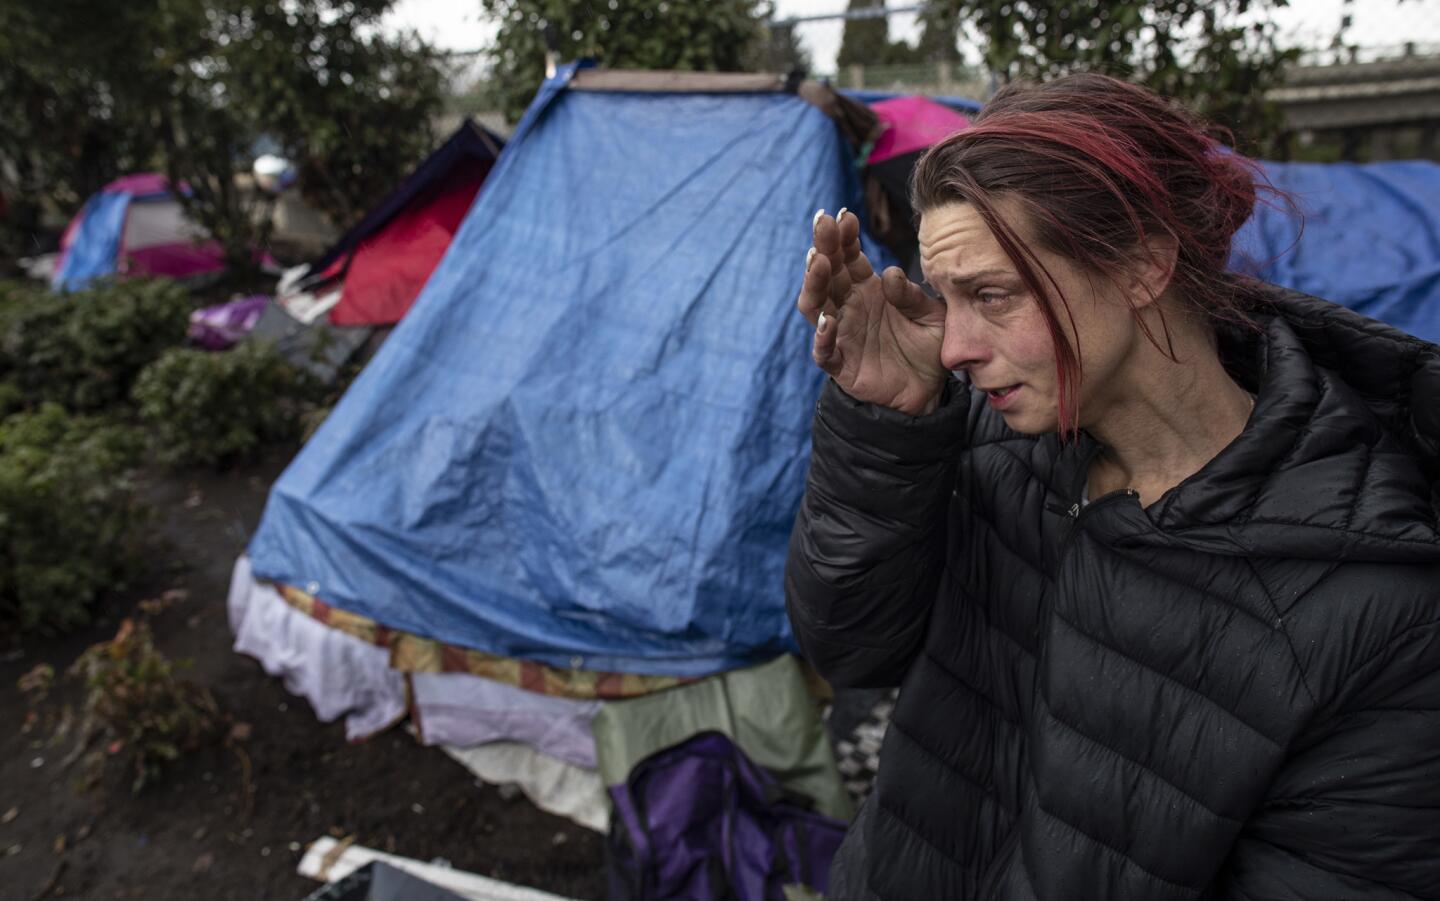 A woman who identified herself as Sky Smart, who has been homeless for 11 years, wipes a tear as she talks about her life at a homeless camp in Portland, Ore.